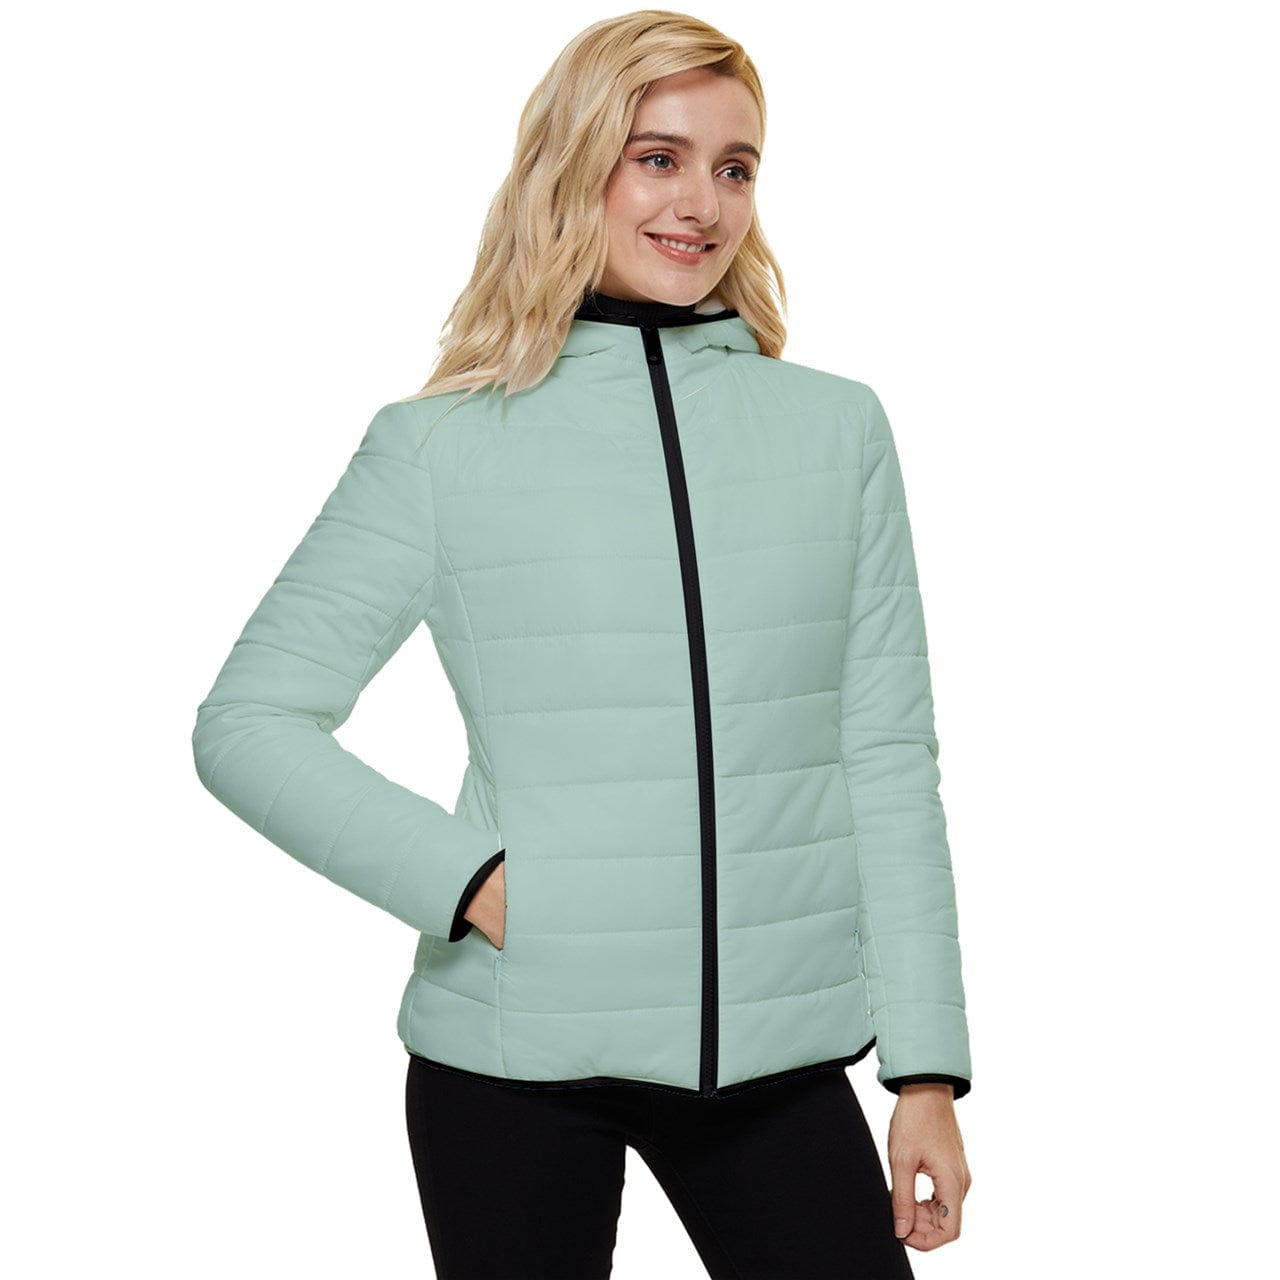 Wheaten Puppy Women's Hooded Quilted Jacket - Mint Green